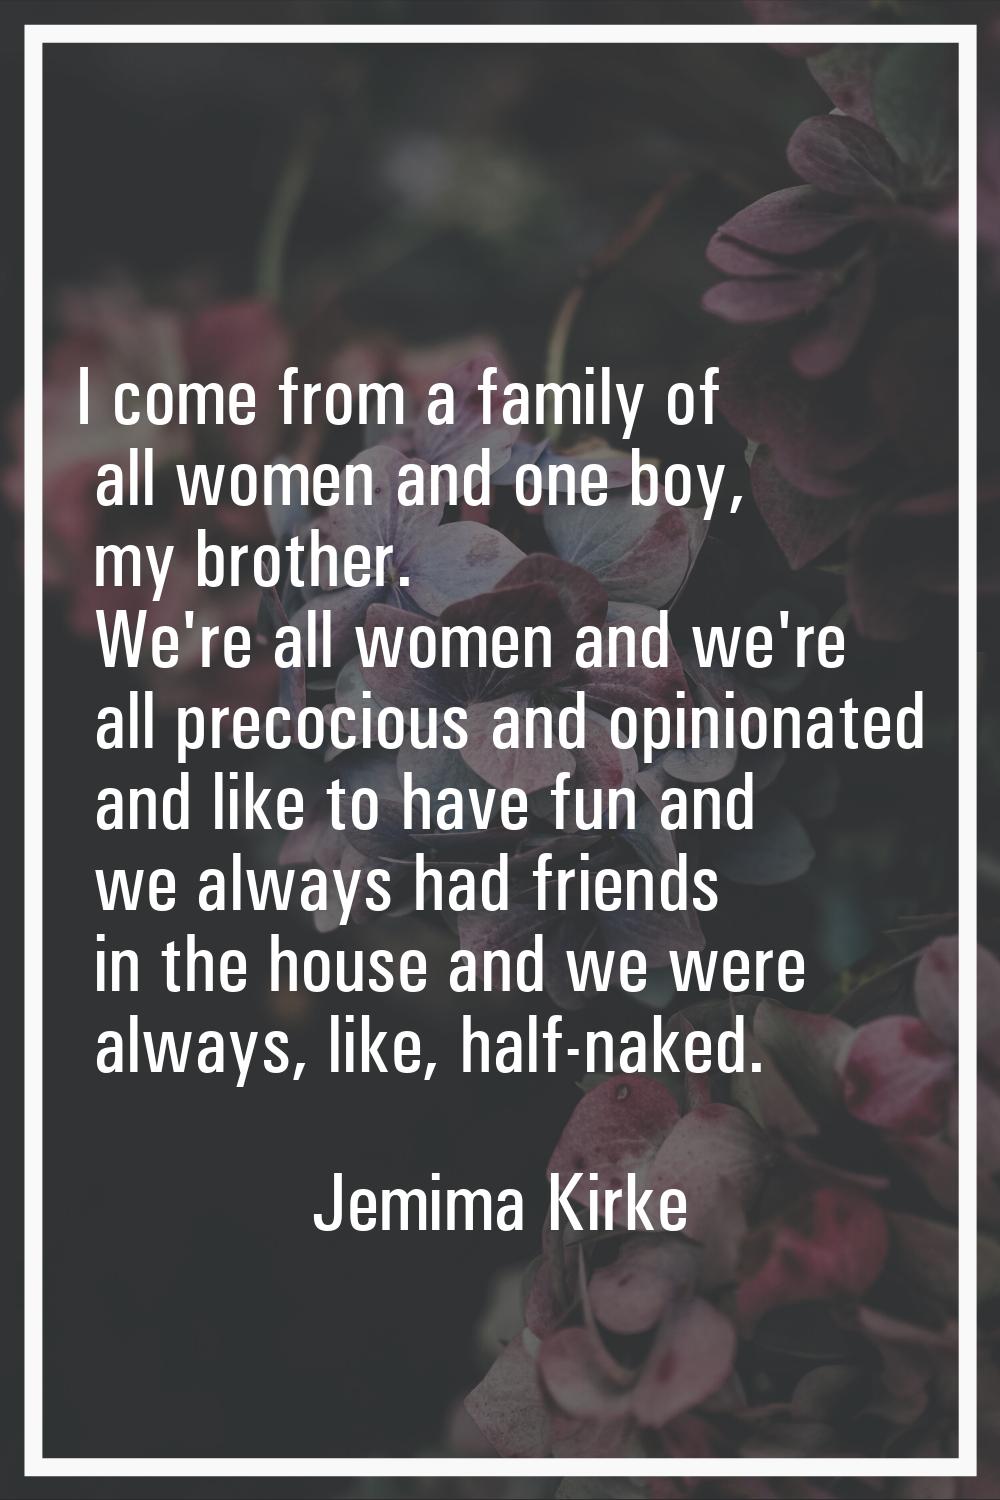 I come from a family of all women and one boy, my brother. We're all women and we're all precocious